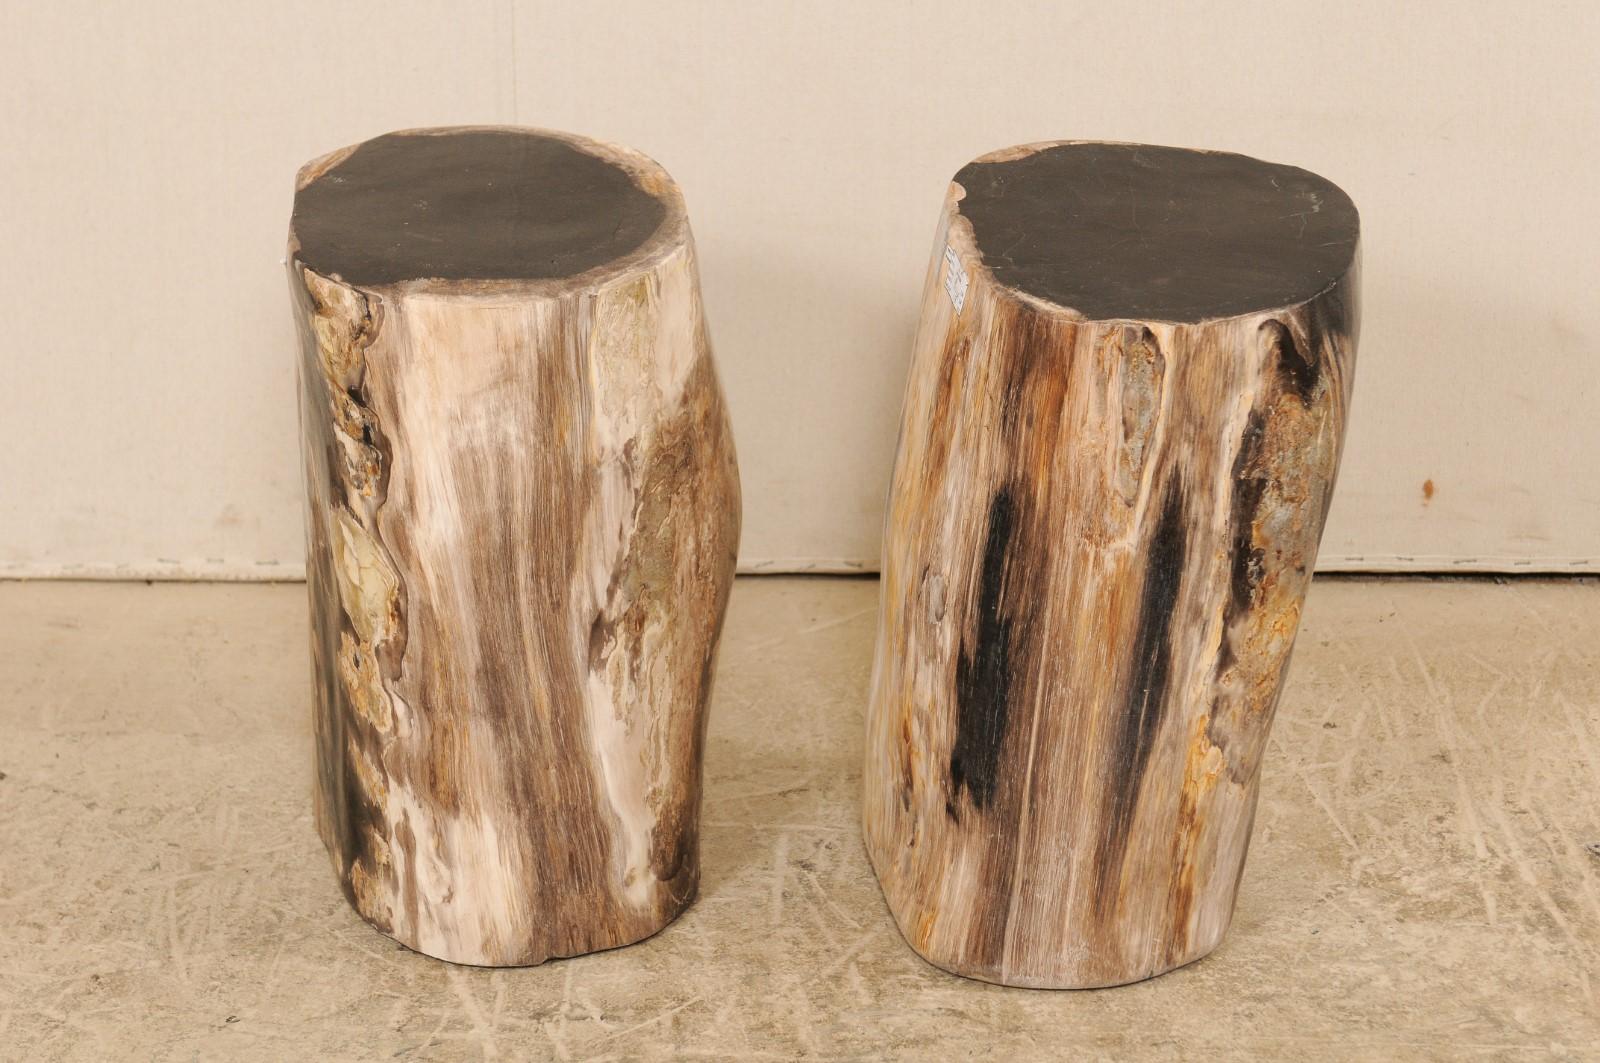 A pair of petrified wood drinks tables (or stools). This pair of petrified wood pedestal tables each have a smoothly polished top and sides, with primarily black tops, and black, grey, and various shades of tan/brown about the perimeter sides.